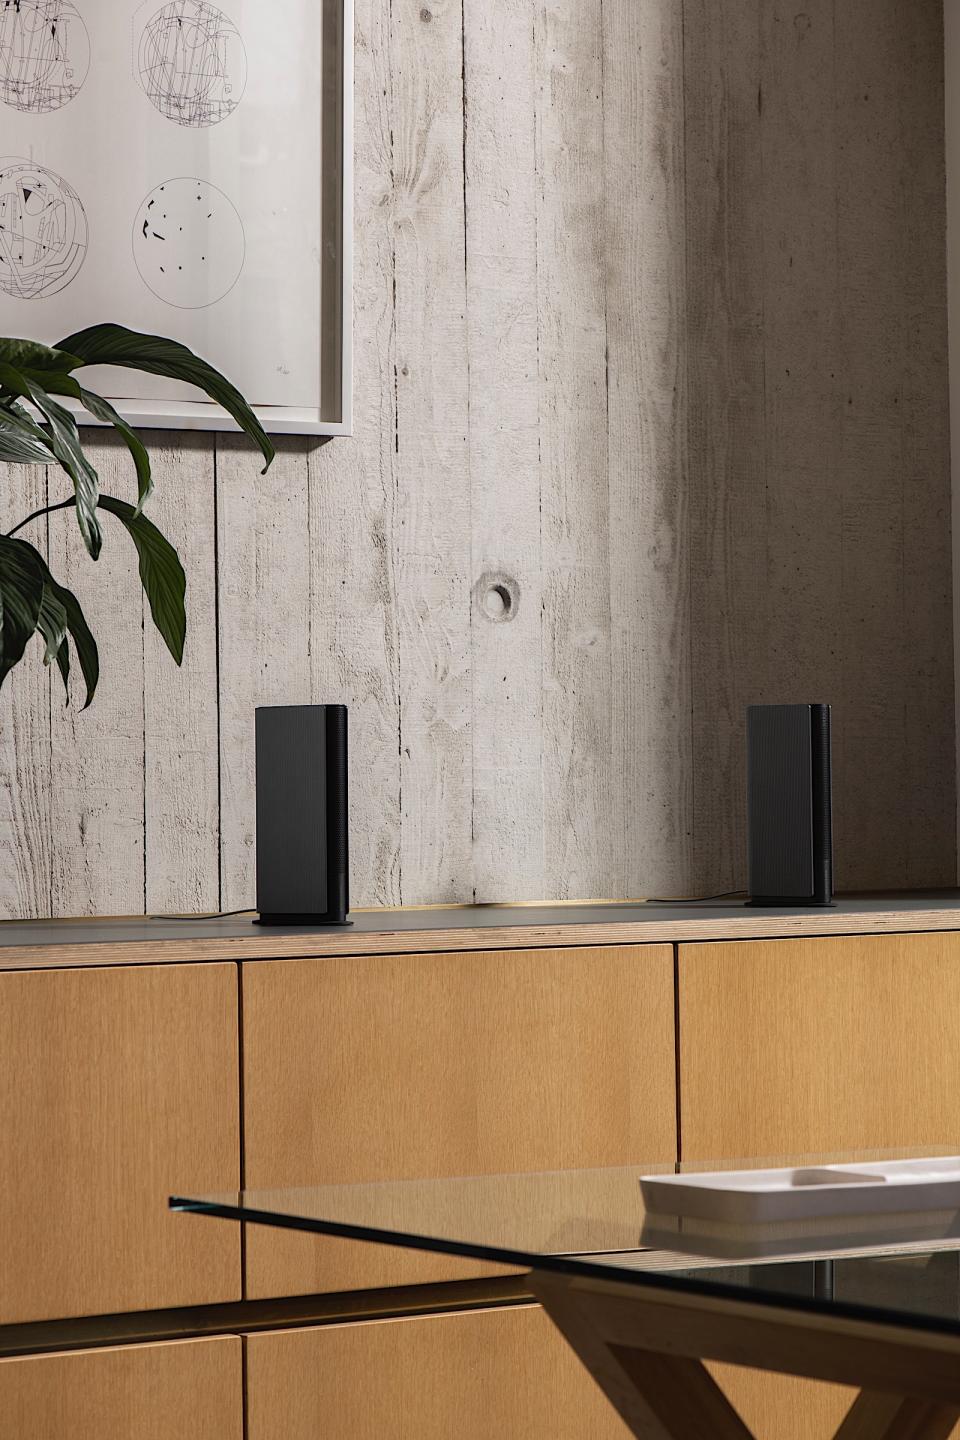 <p>With a design inspired by a book, Bang & Olufsen's Beosound Emerge is an impressively slim and full-featured speaker.</p>
